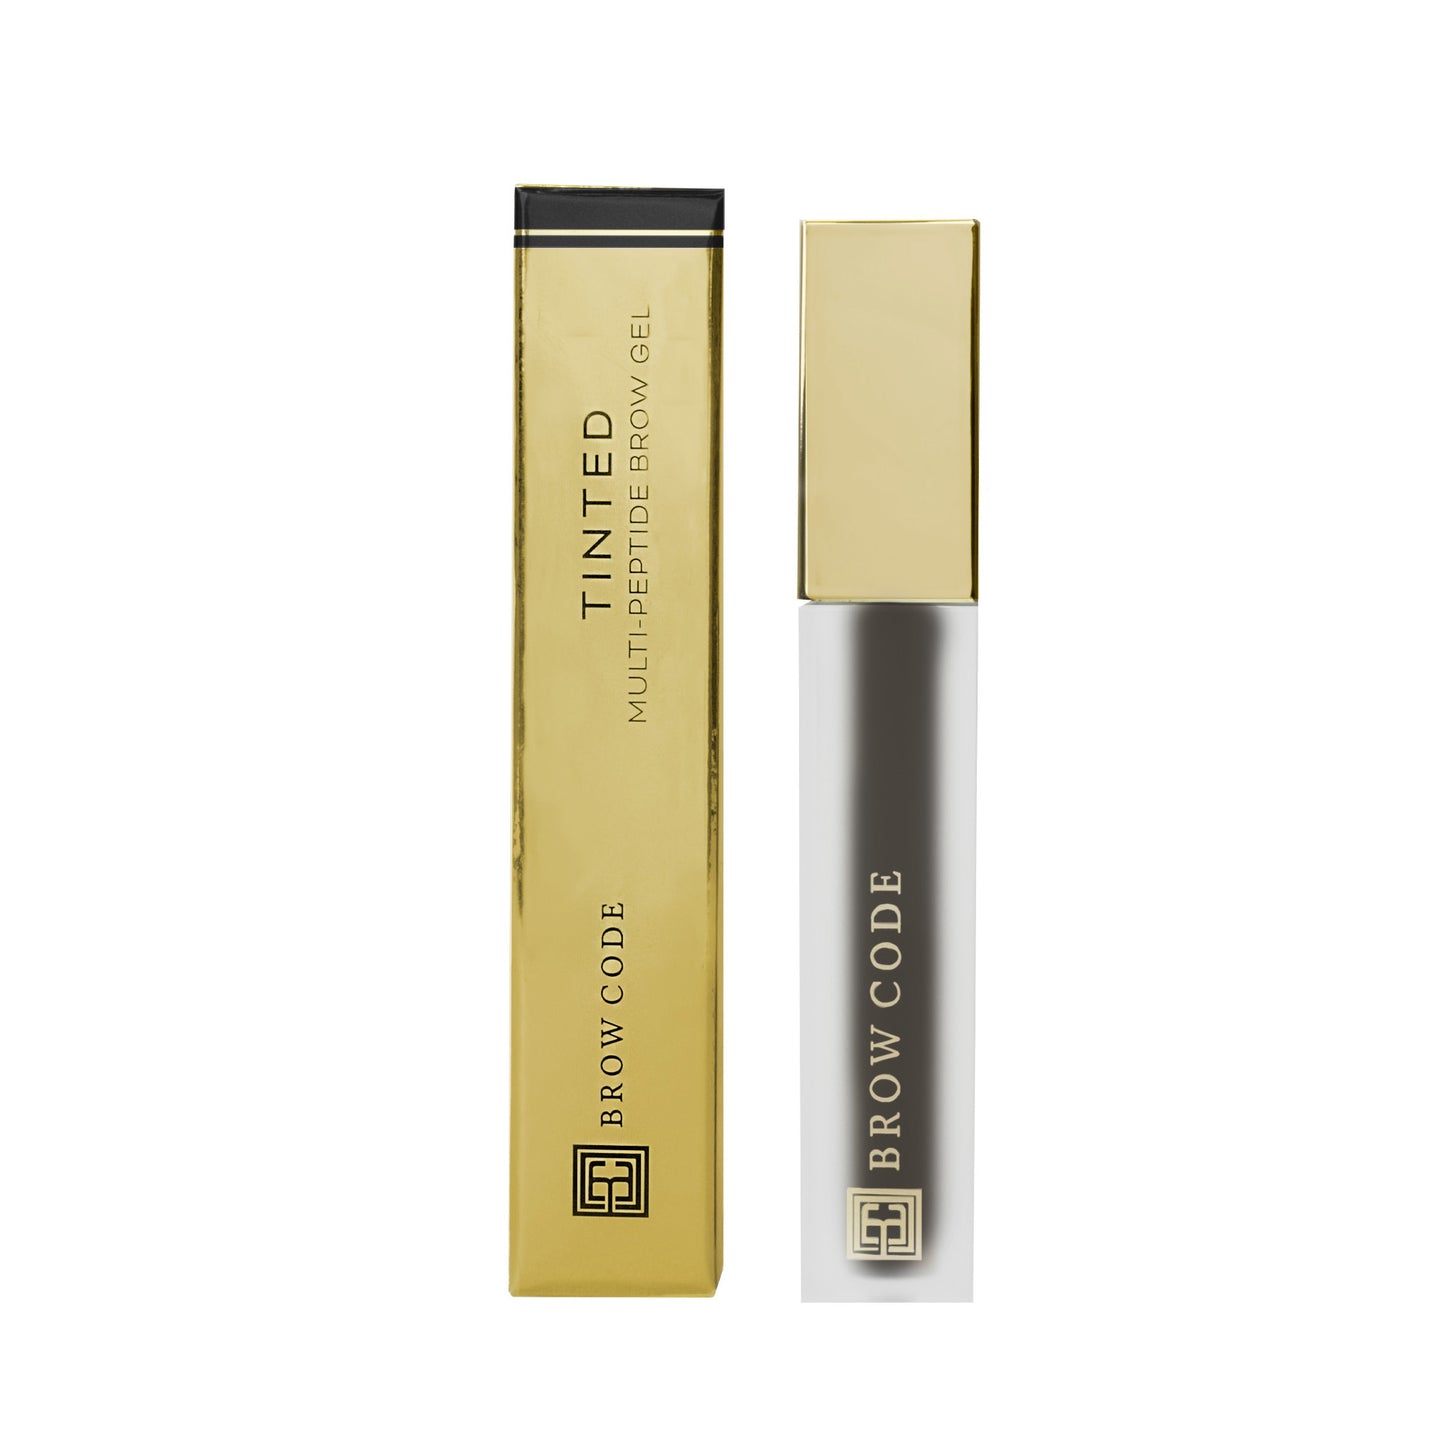 Tinted Multi-Peptide Brow Gel - Color-Granite- product alongside packaging against a white background